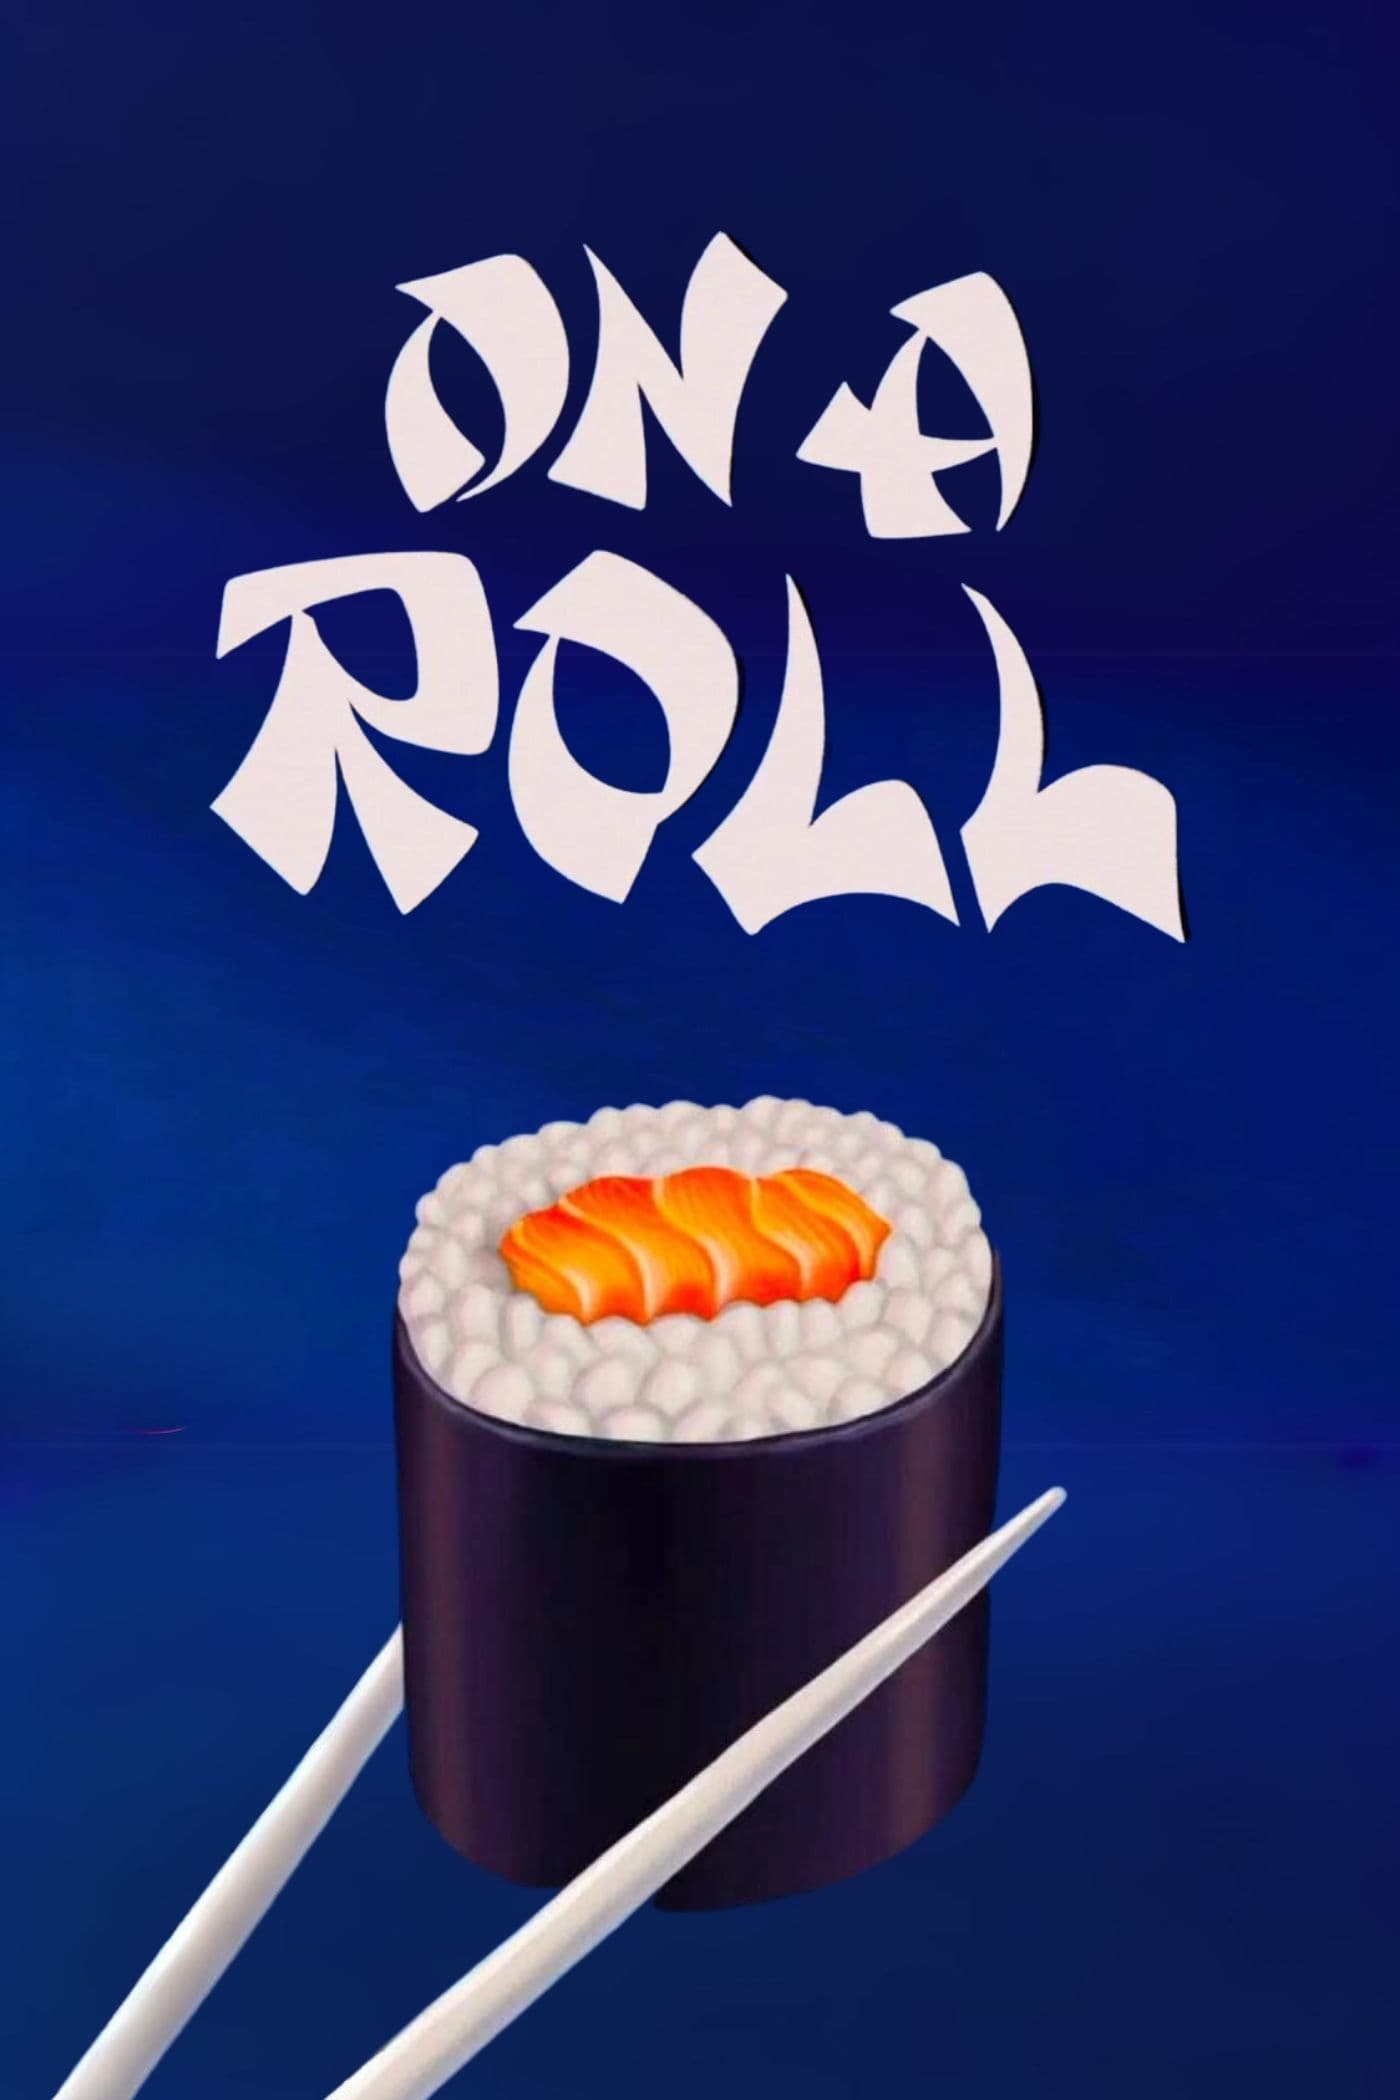 On a Roll (2021)